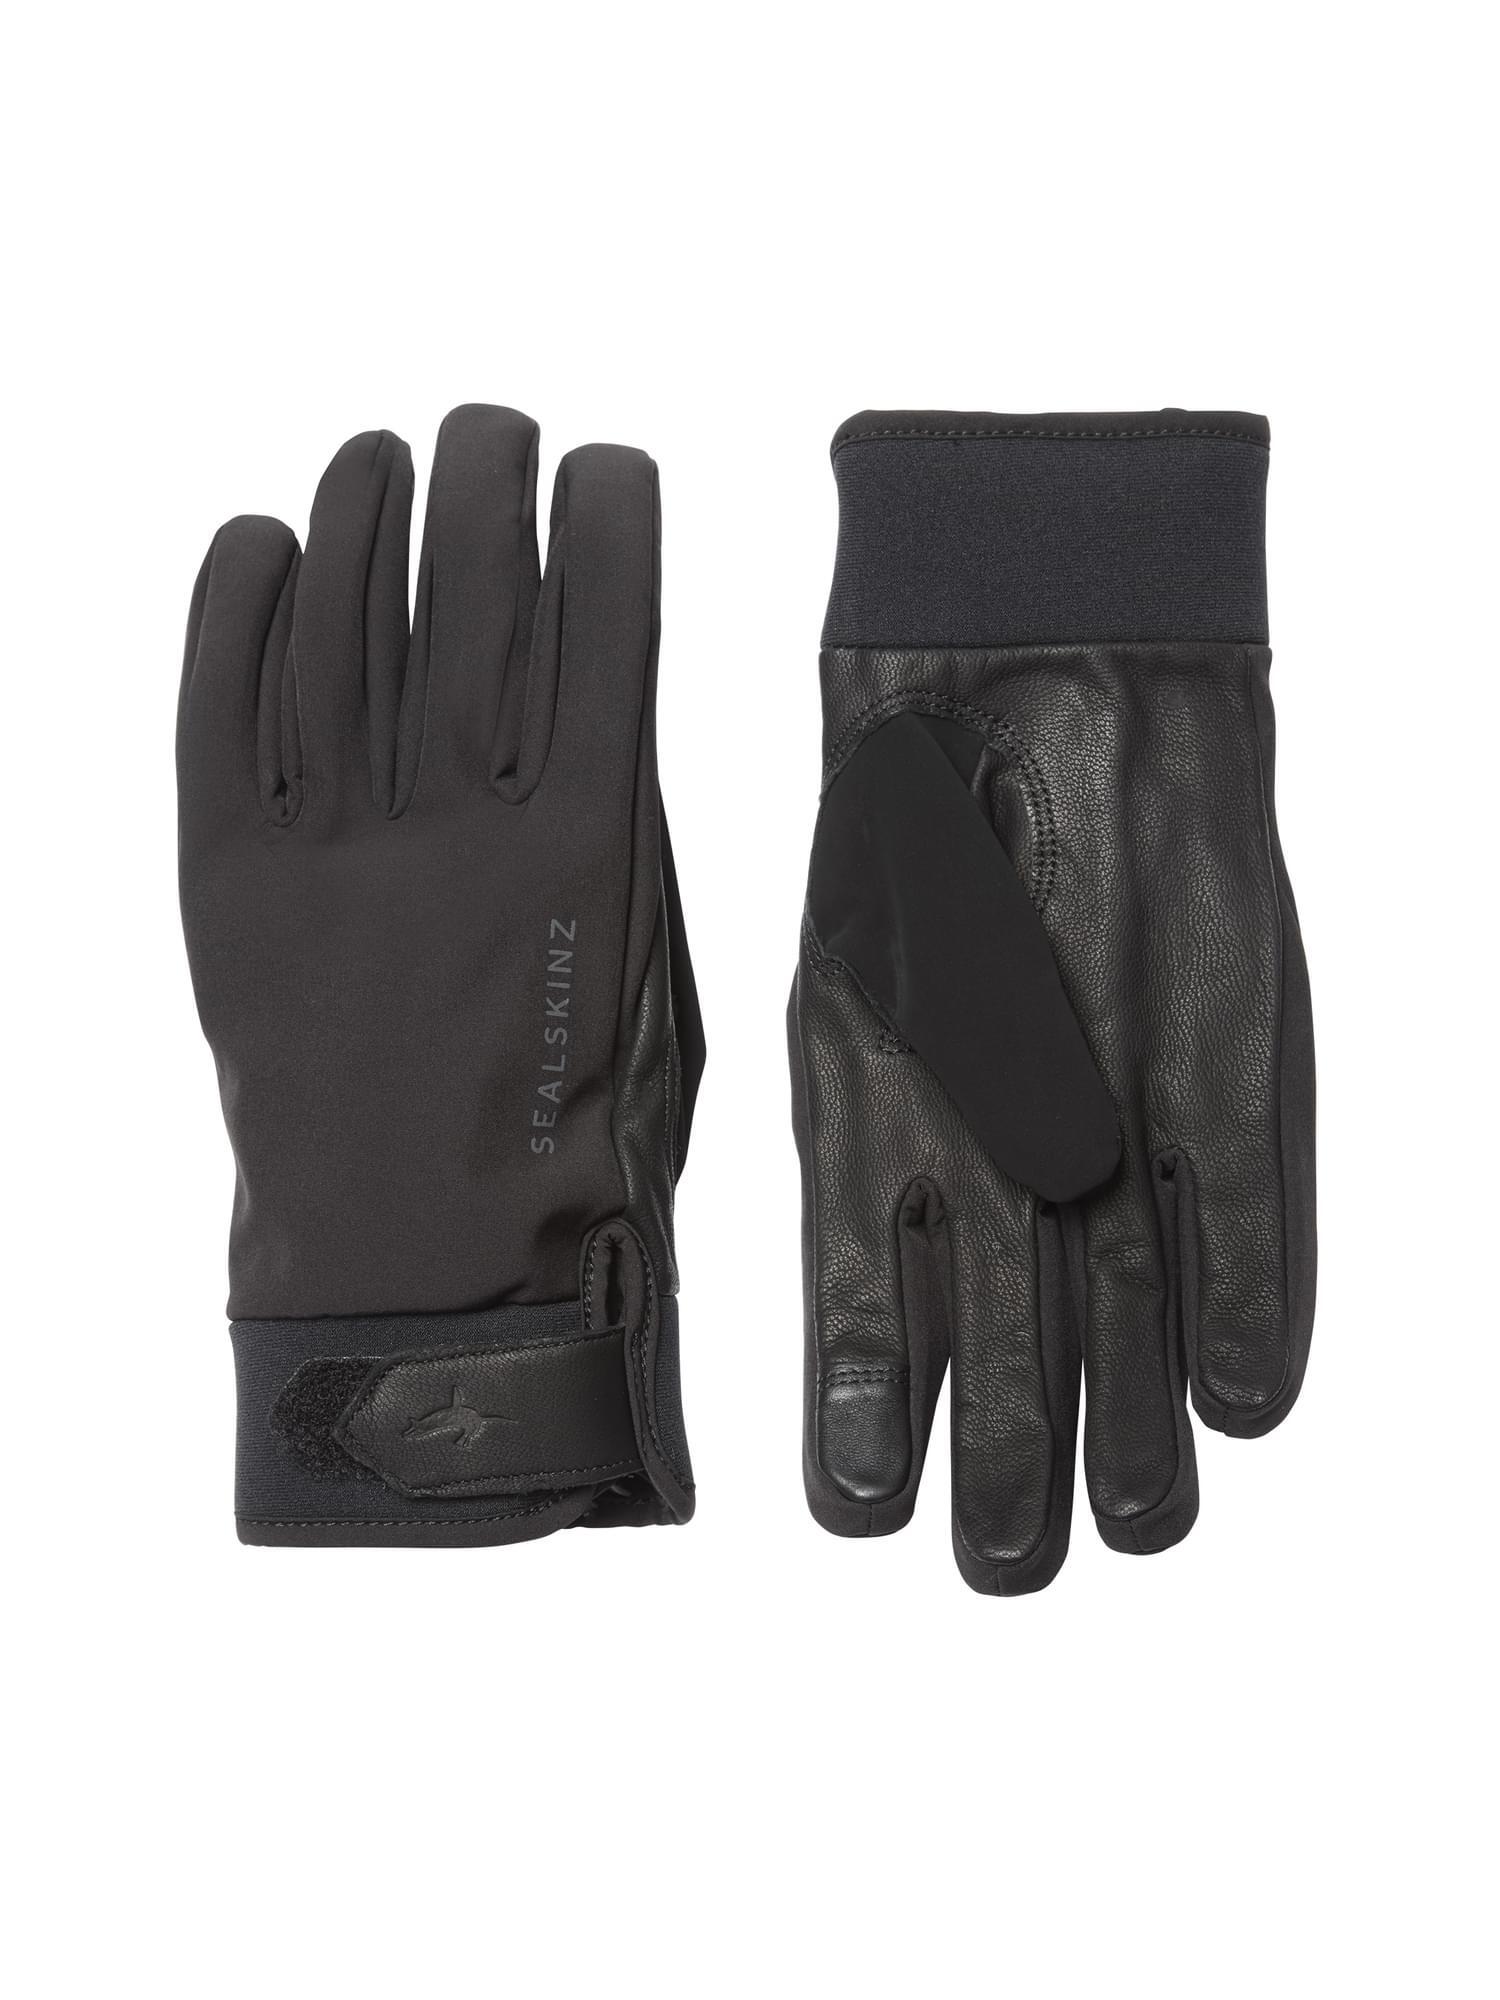 Ladies Waterproof All Weather Insulated Gloves 1/3